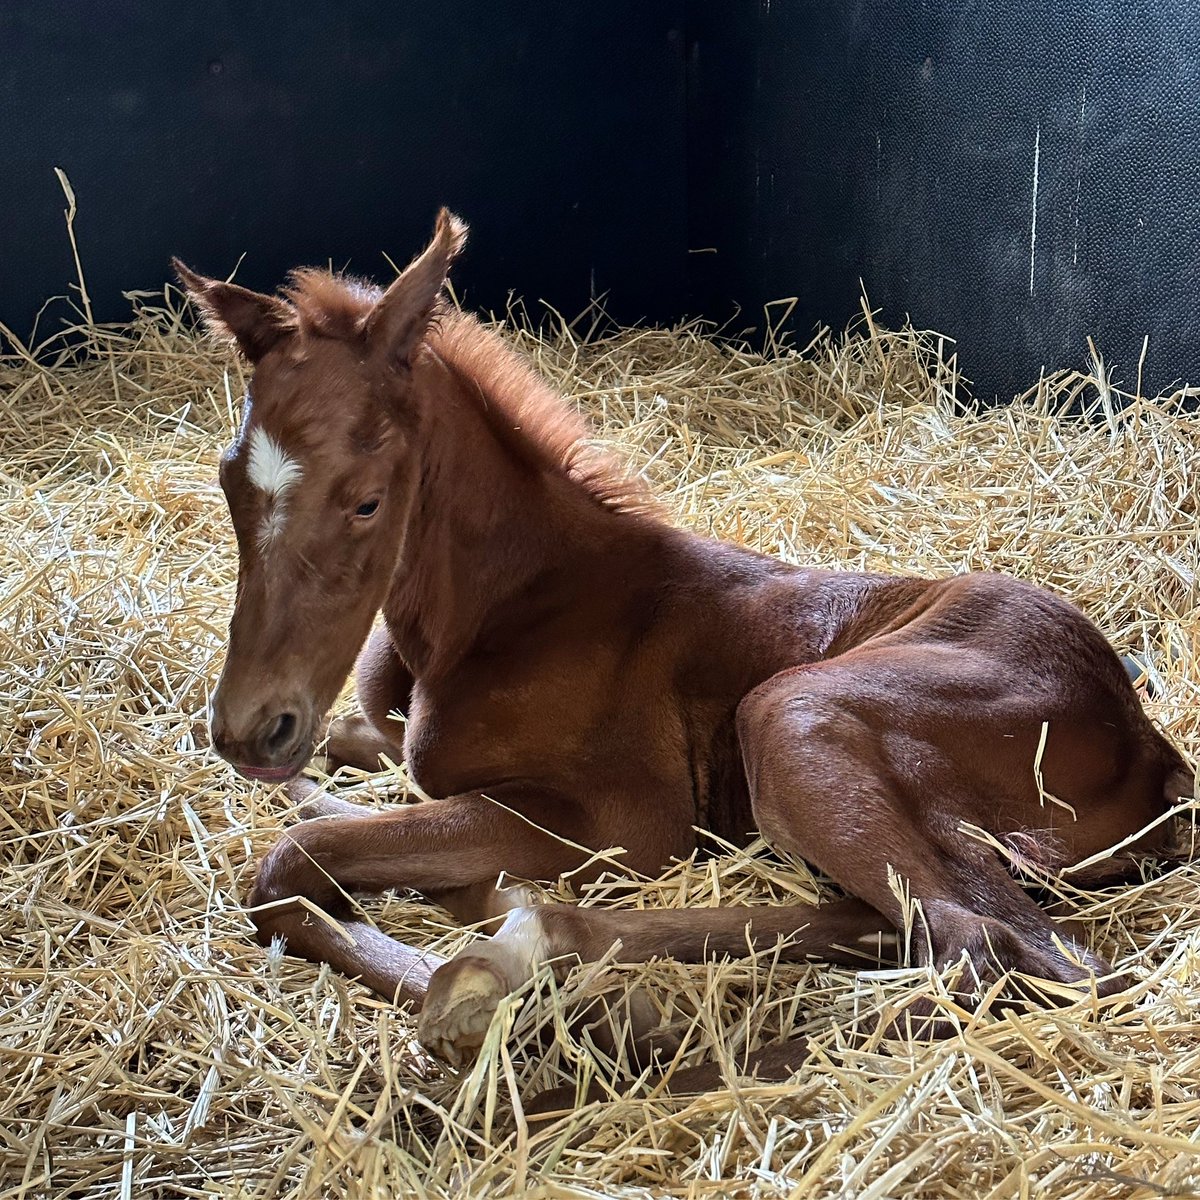 #SongHillThoroughbreds welcomed a filly this special #foalfriday, just in time for the #KentuckyOaks! #girlpower #NYbred @nytbreeders